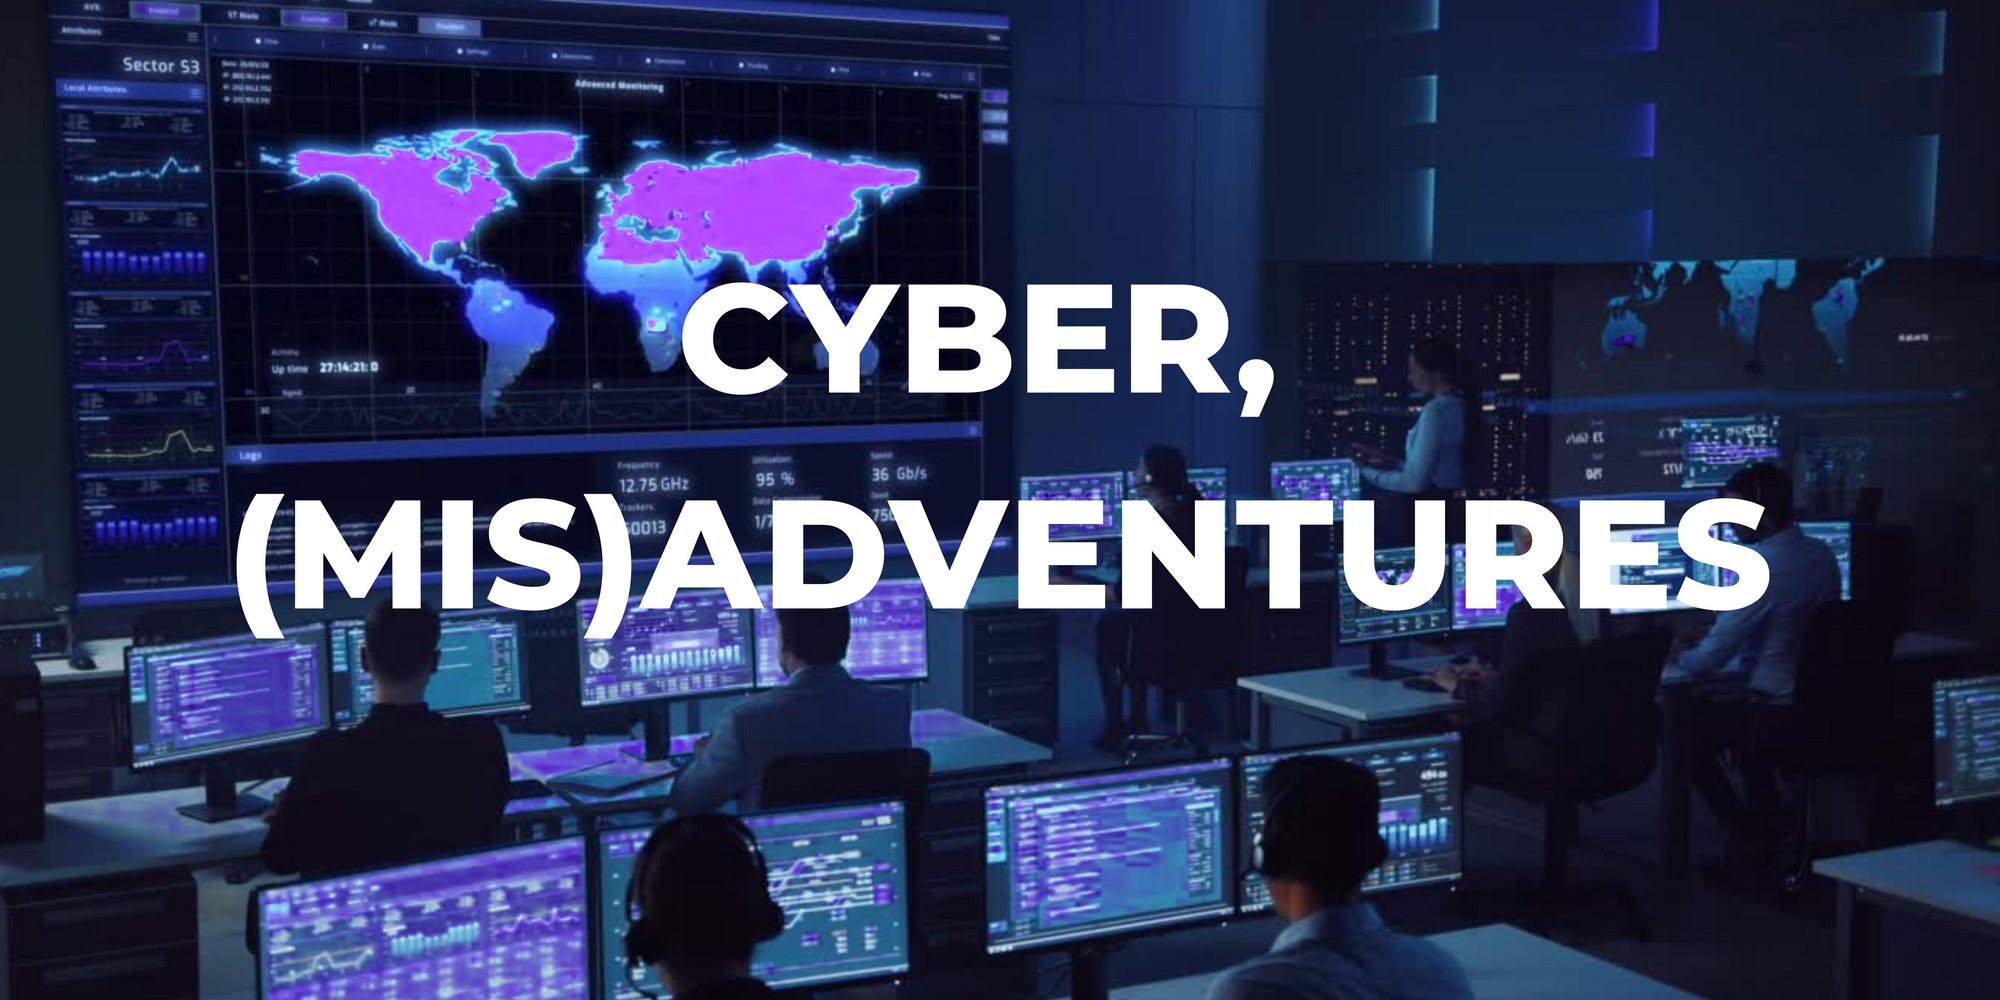 Cyber, (Mis)Adventures Issue #2 - MOVEit, Cyberattacks for hire in India, SMS Pumping Fraud Explained, Spotlight on LLM's